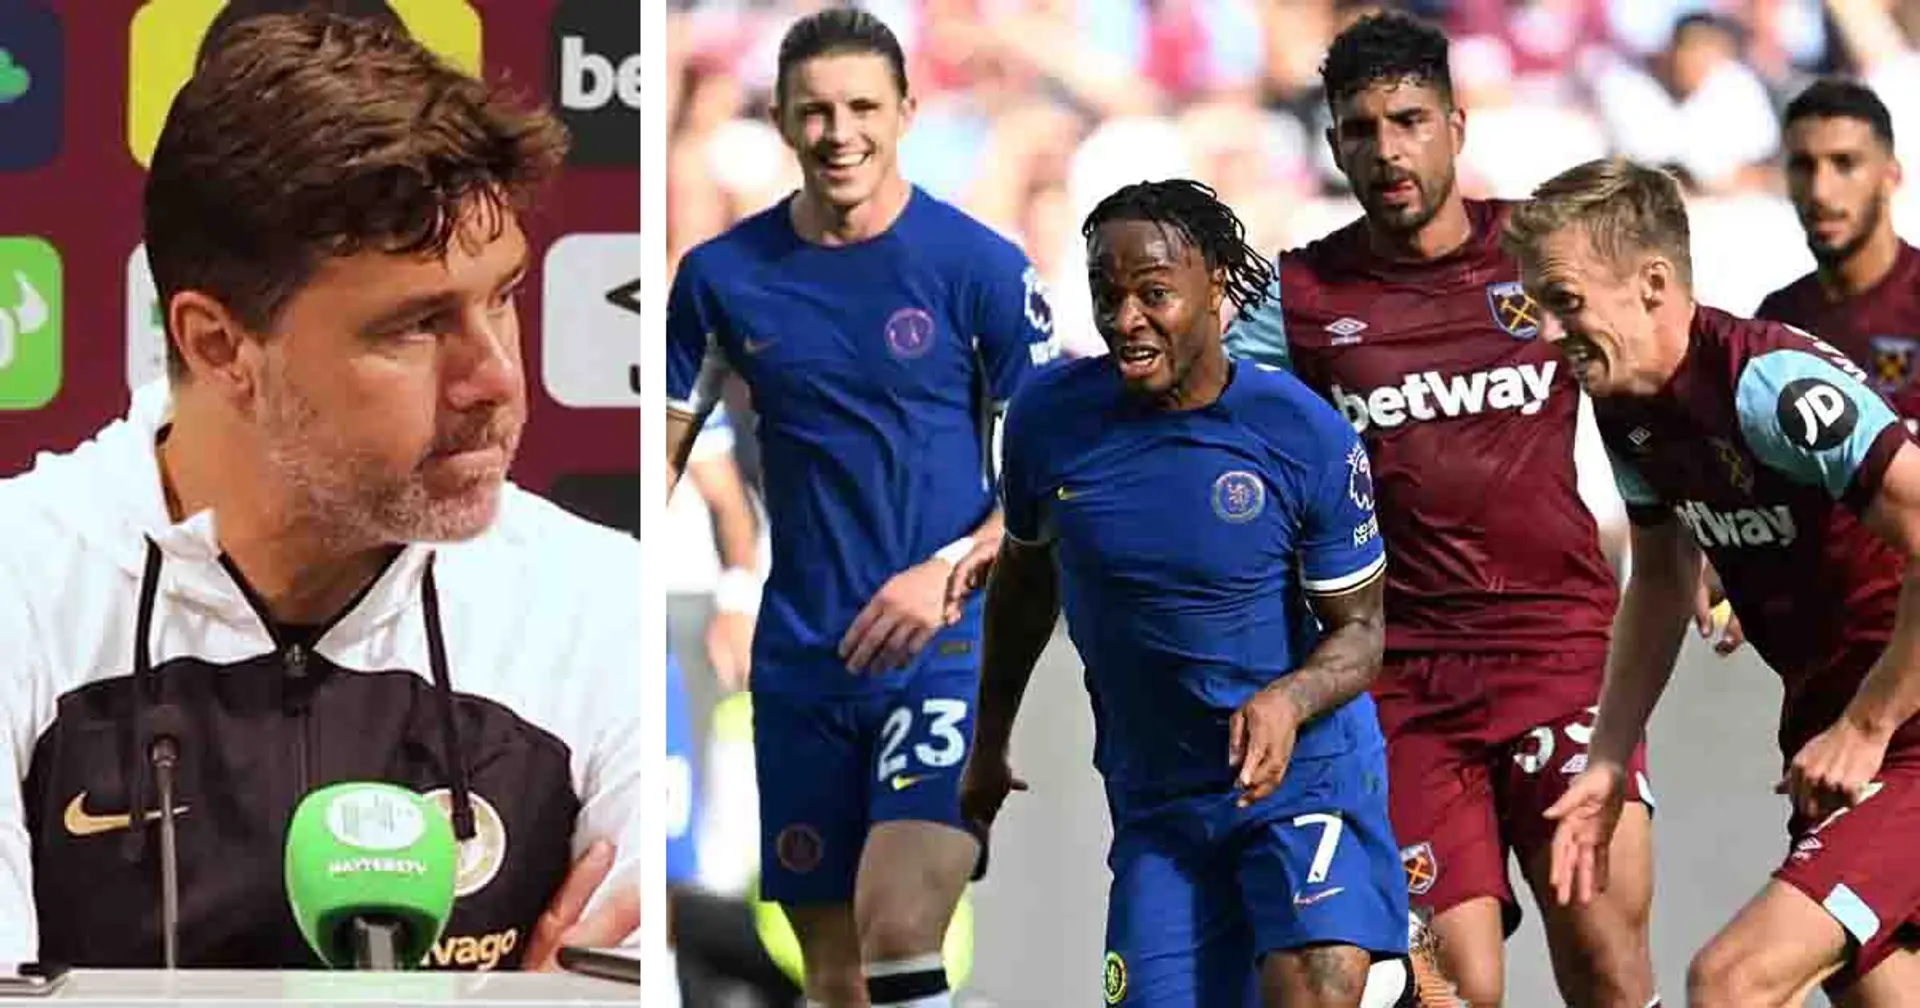 'He's a player who can deliver': Pochettino impressed with one Chelsea player's outing vs West Ham